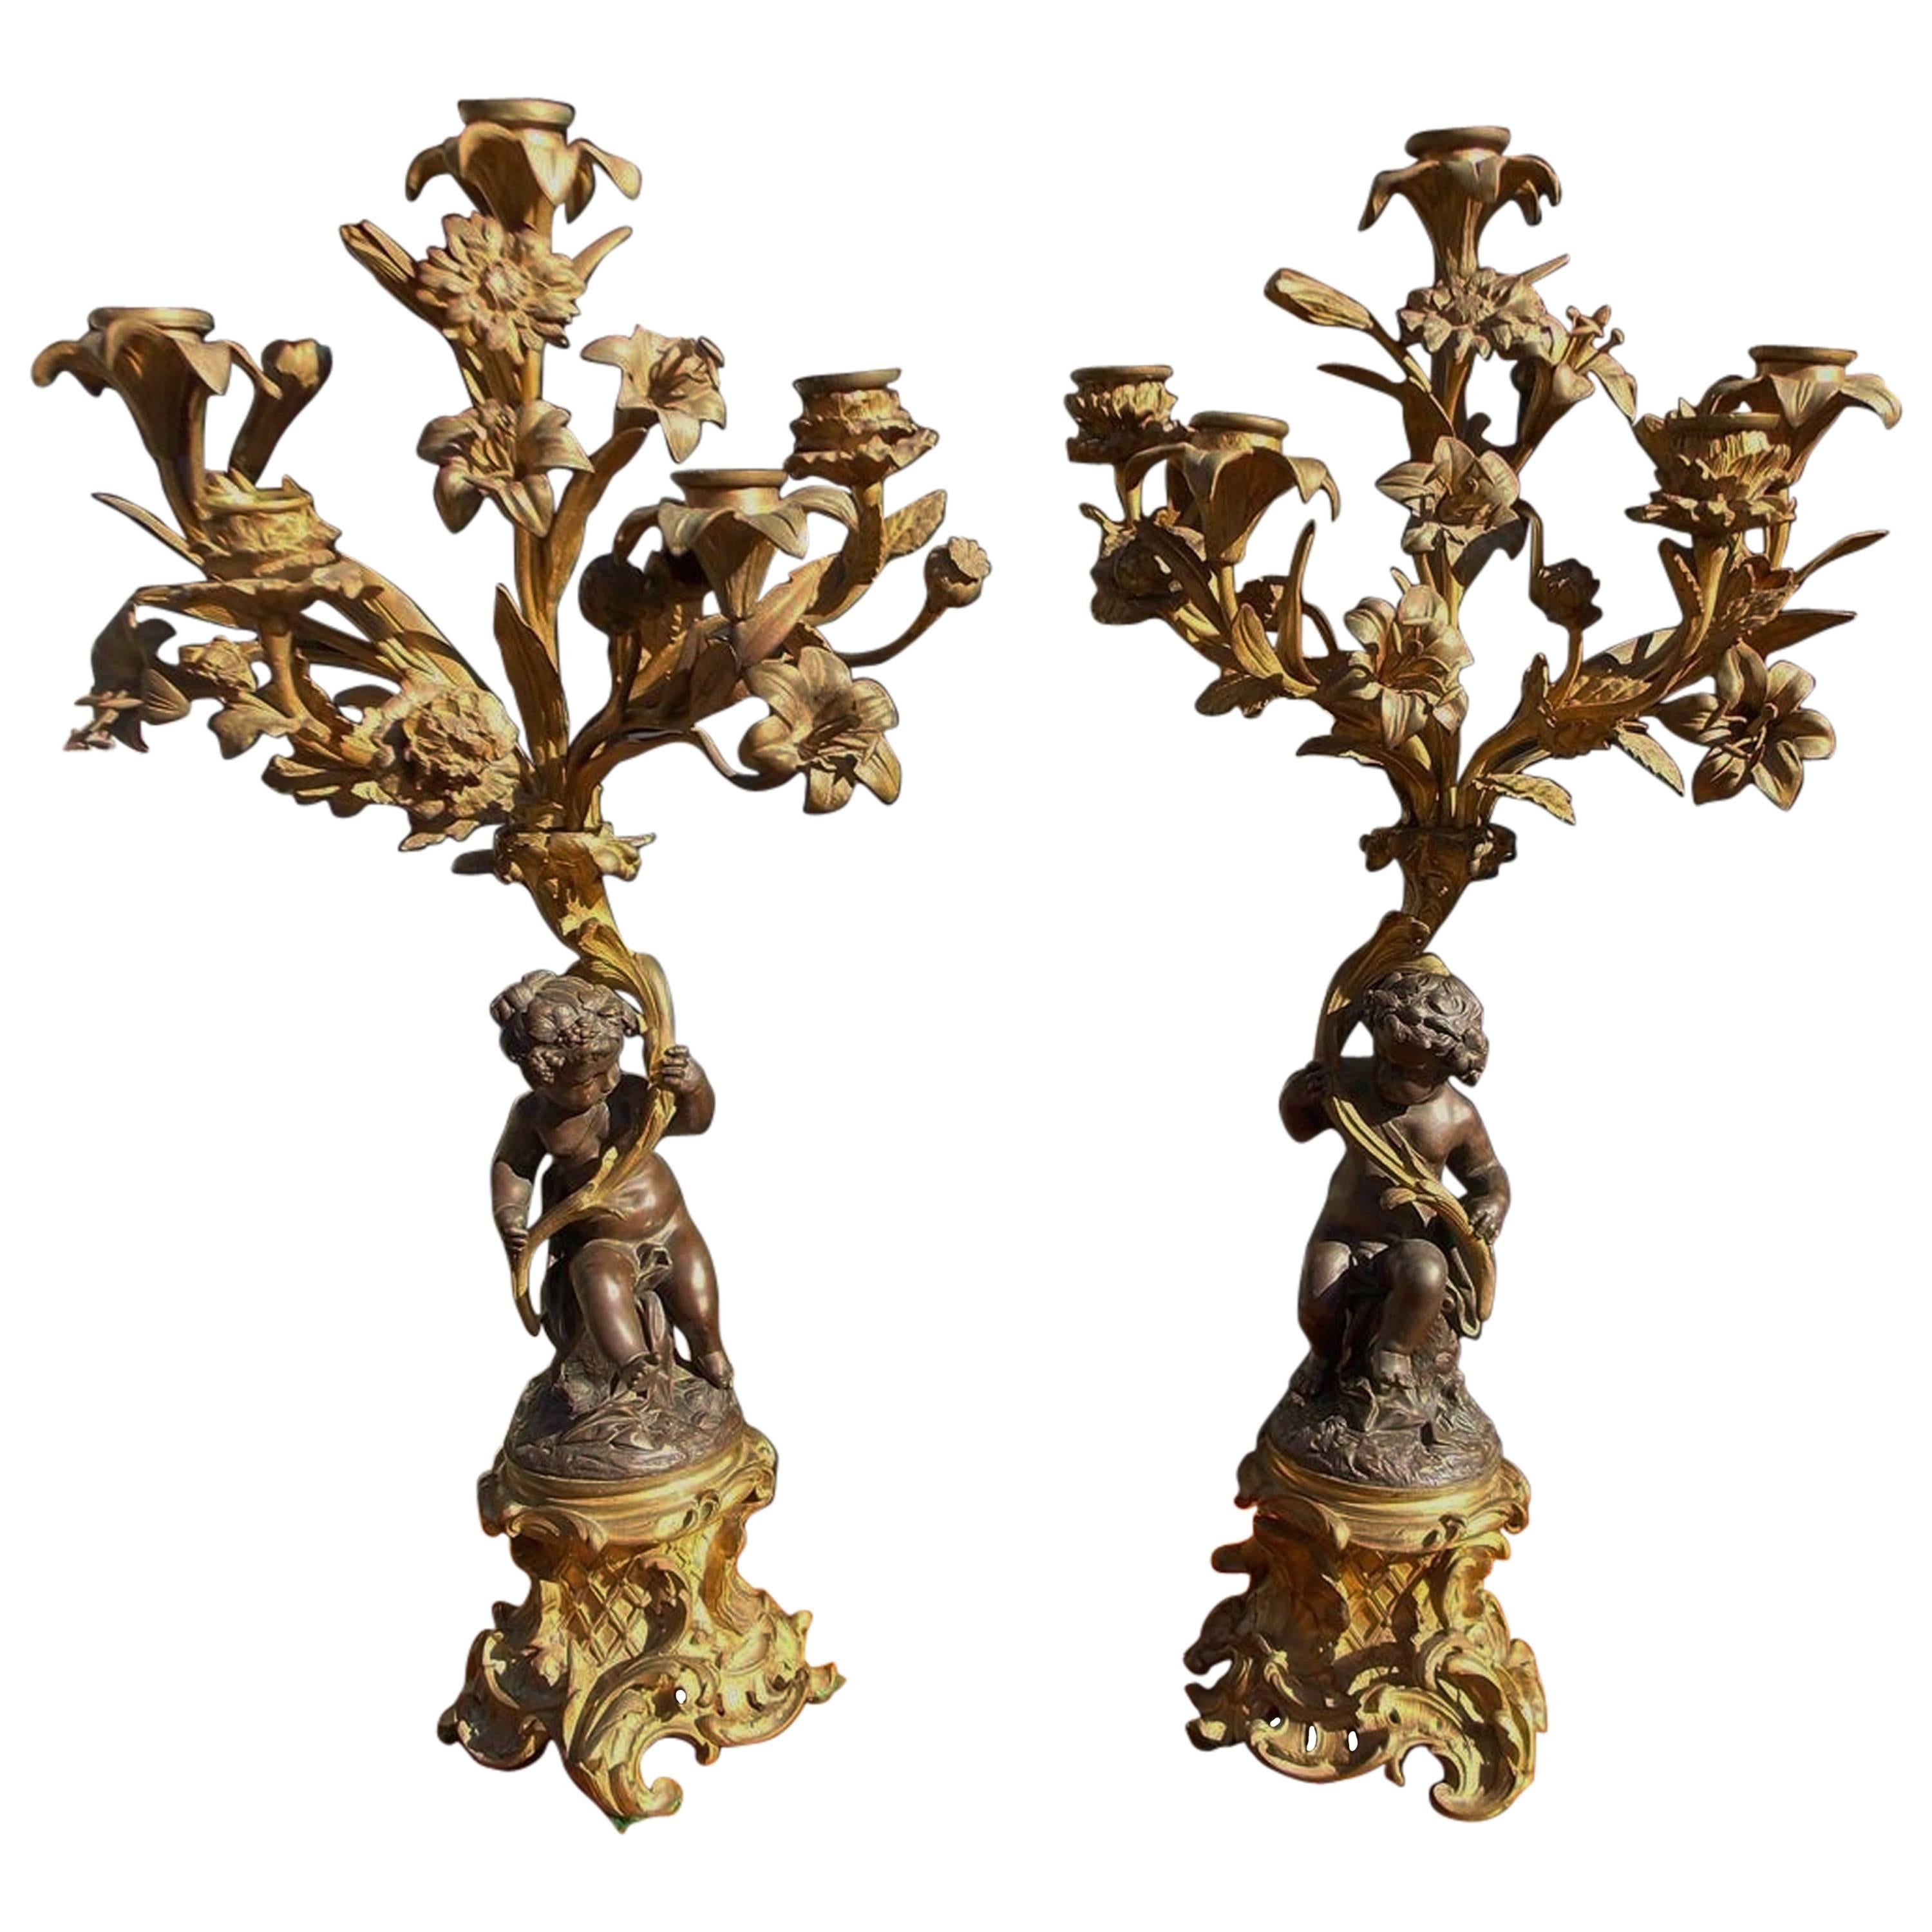 Pair of French Ormolu and Bronze Figural Candelabras, Circa 1830